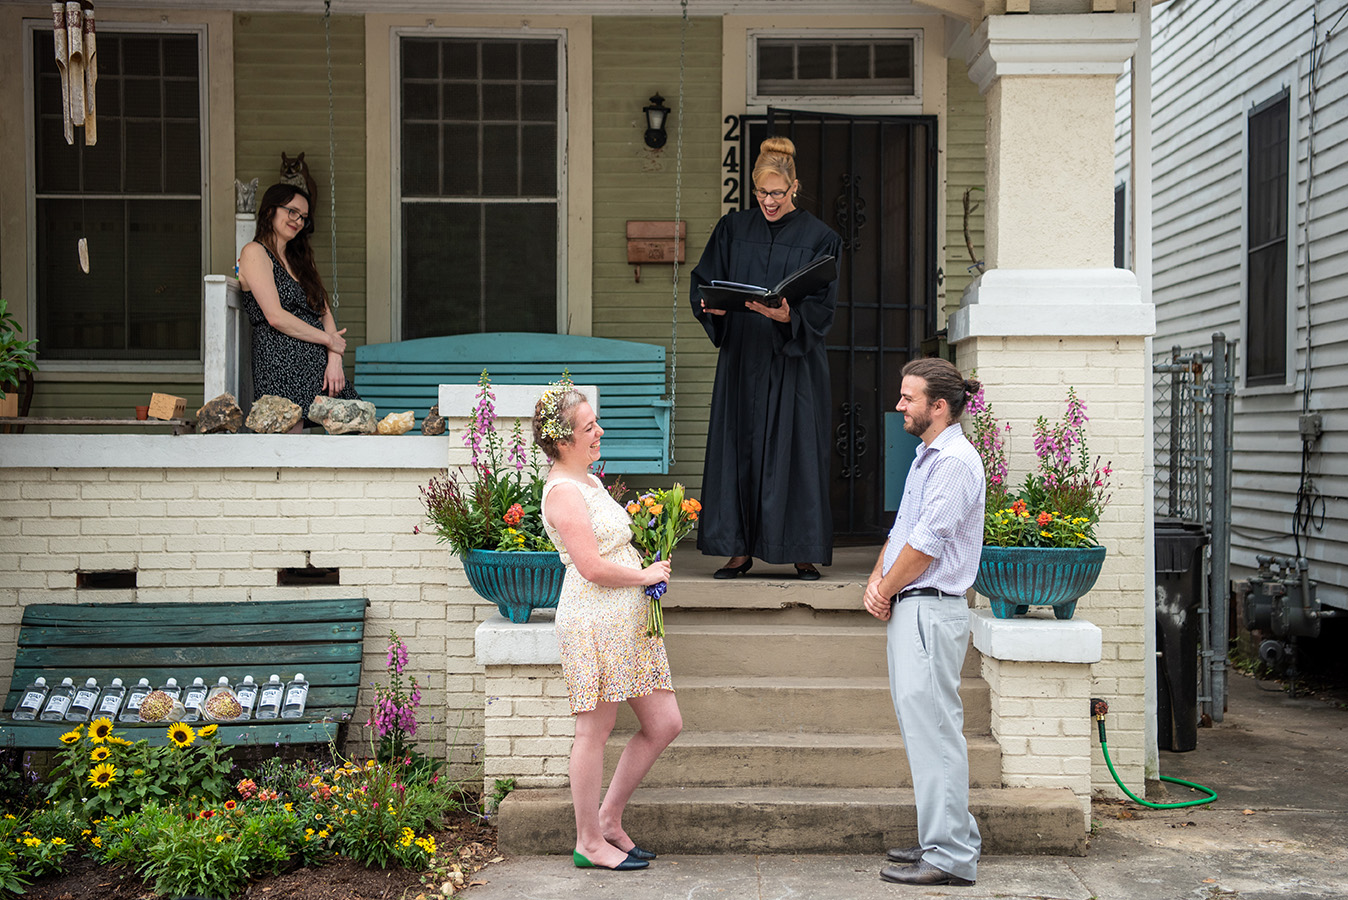 Elizabeth and Greg's ceremony took place on the front porch of their house in Treme with Diane Lundeen officiating.